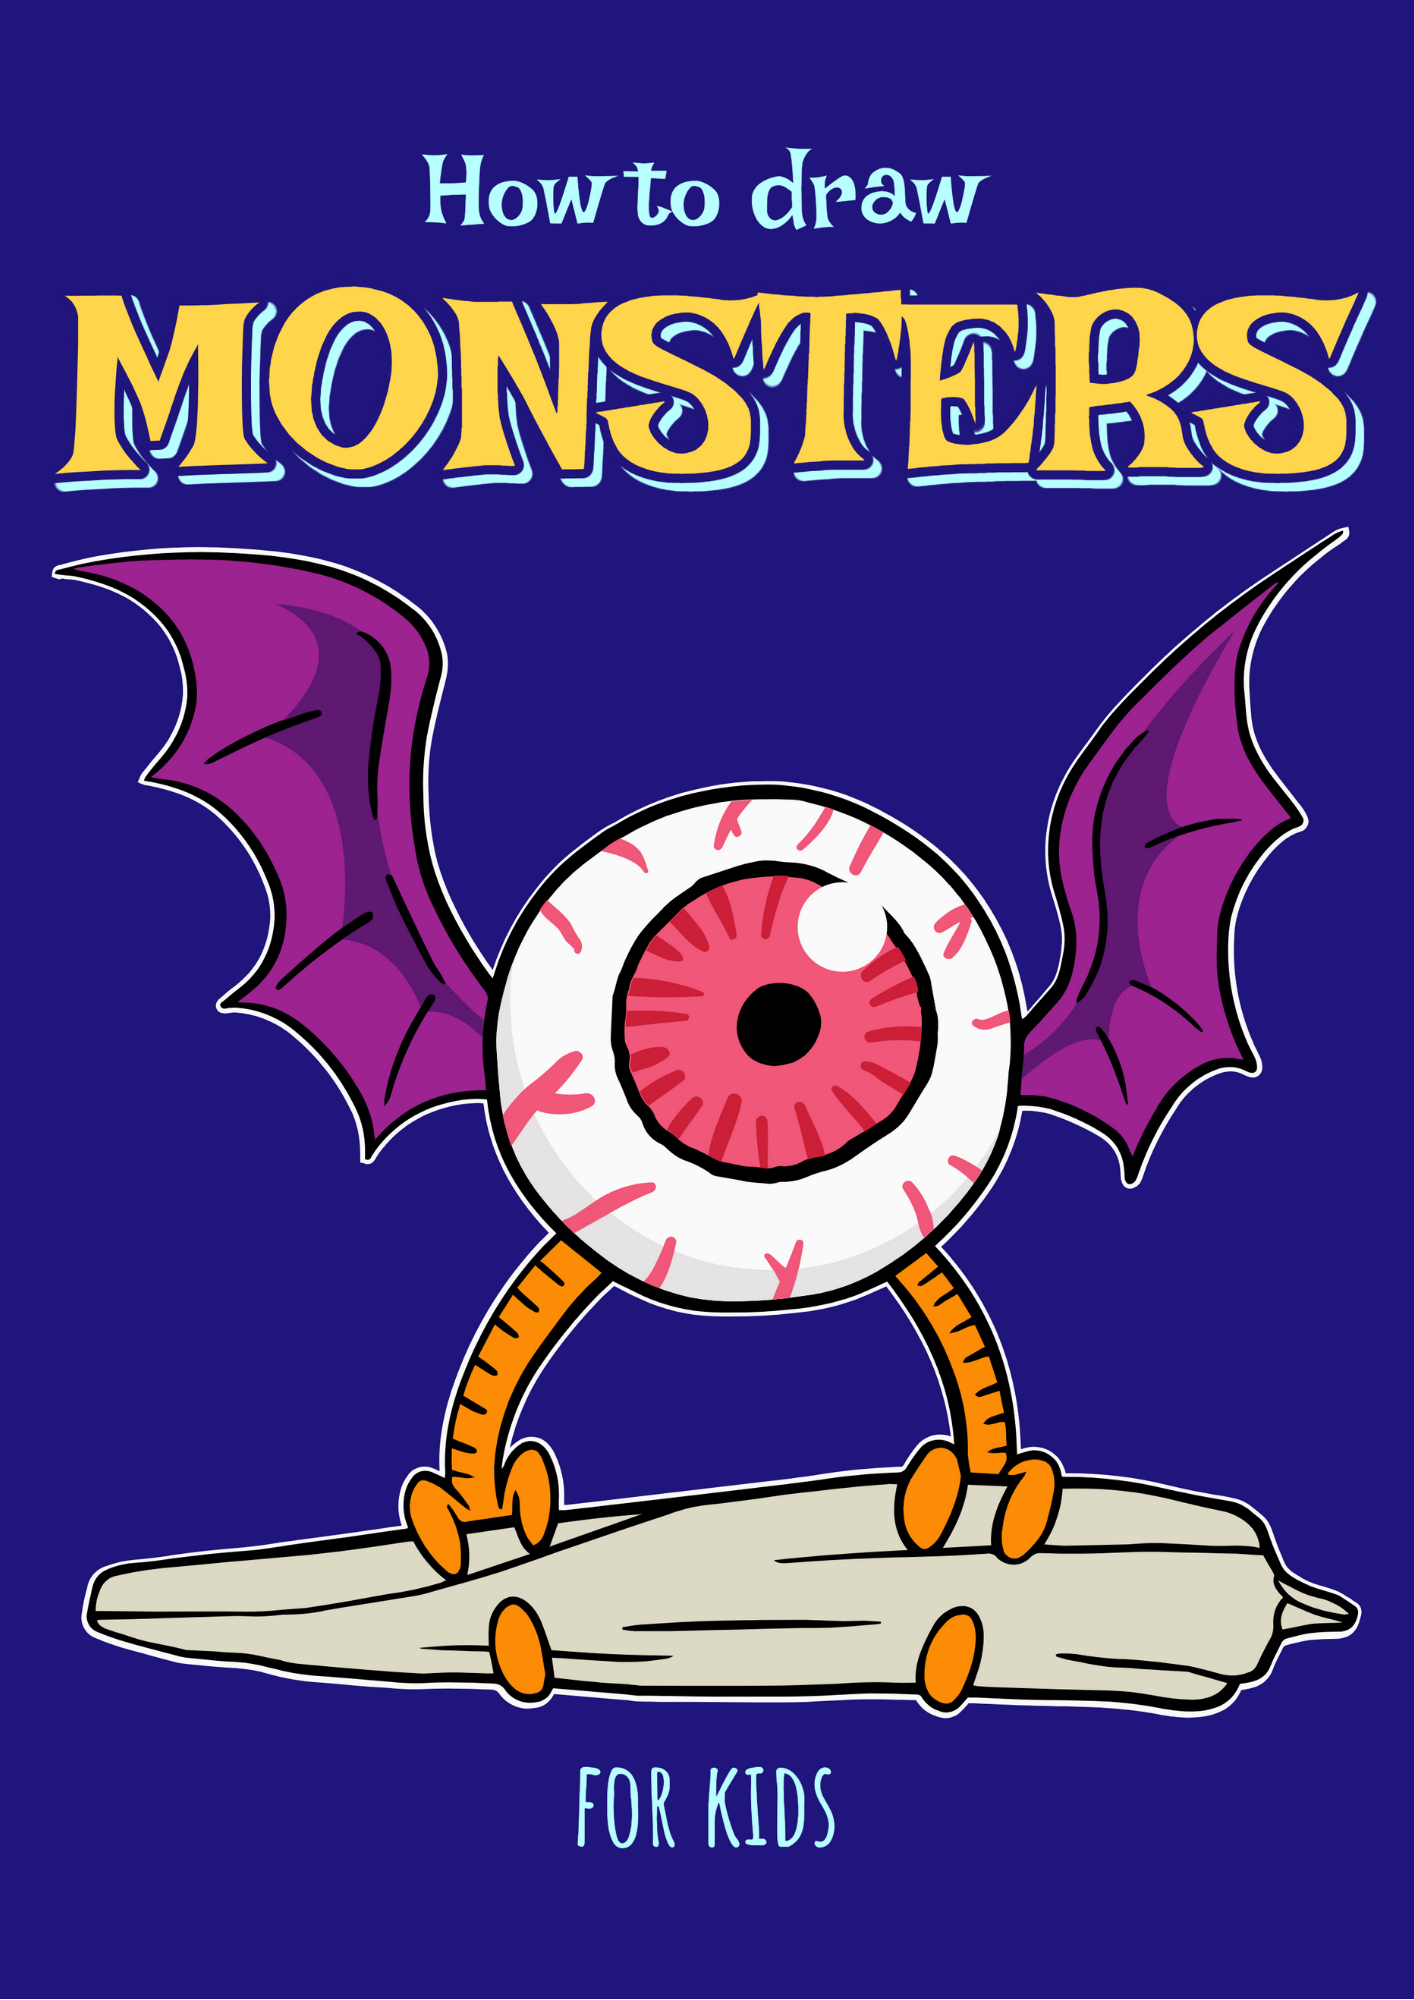 How to Draw Monsters for Kids